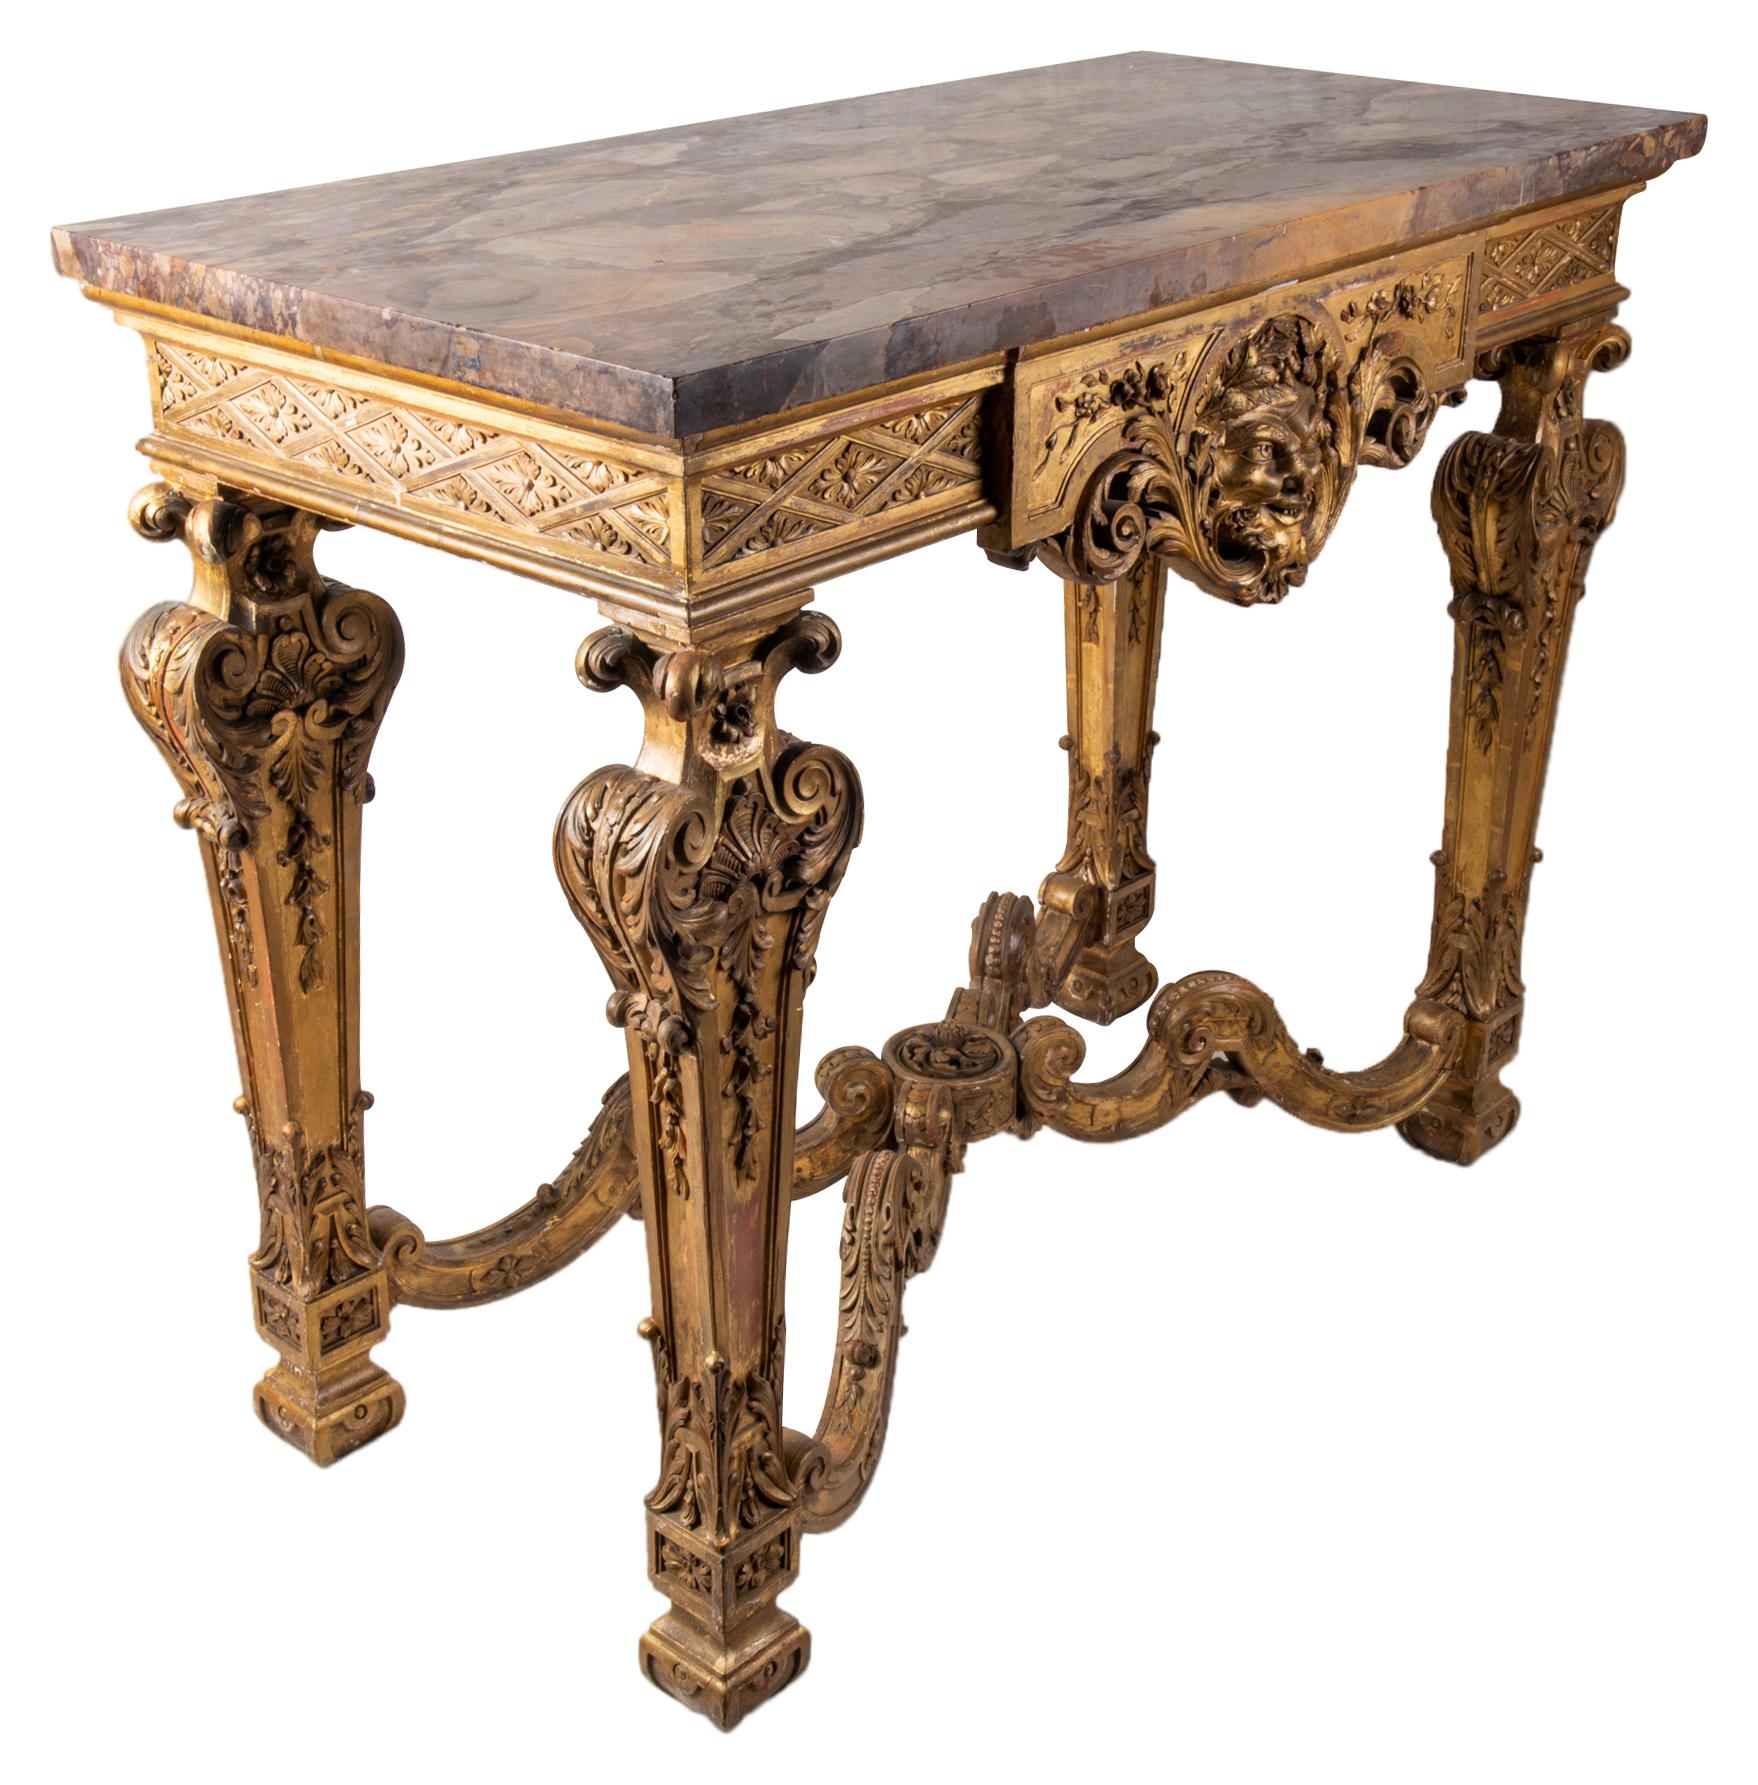 A good quality Italian 18th century style carved giltwood console table, having its original marble top, classical motif and mask decoration to the frieze, raised on four tapering legs each with carved scrolling design, united by a scrolling